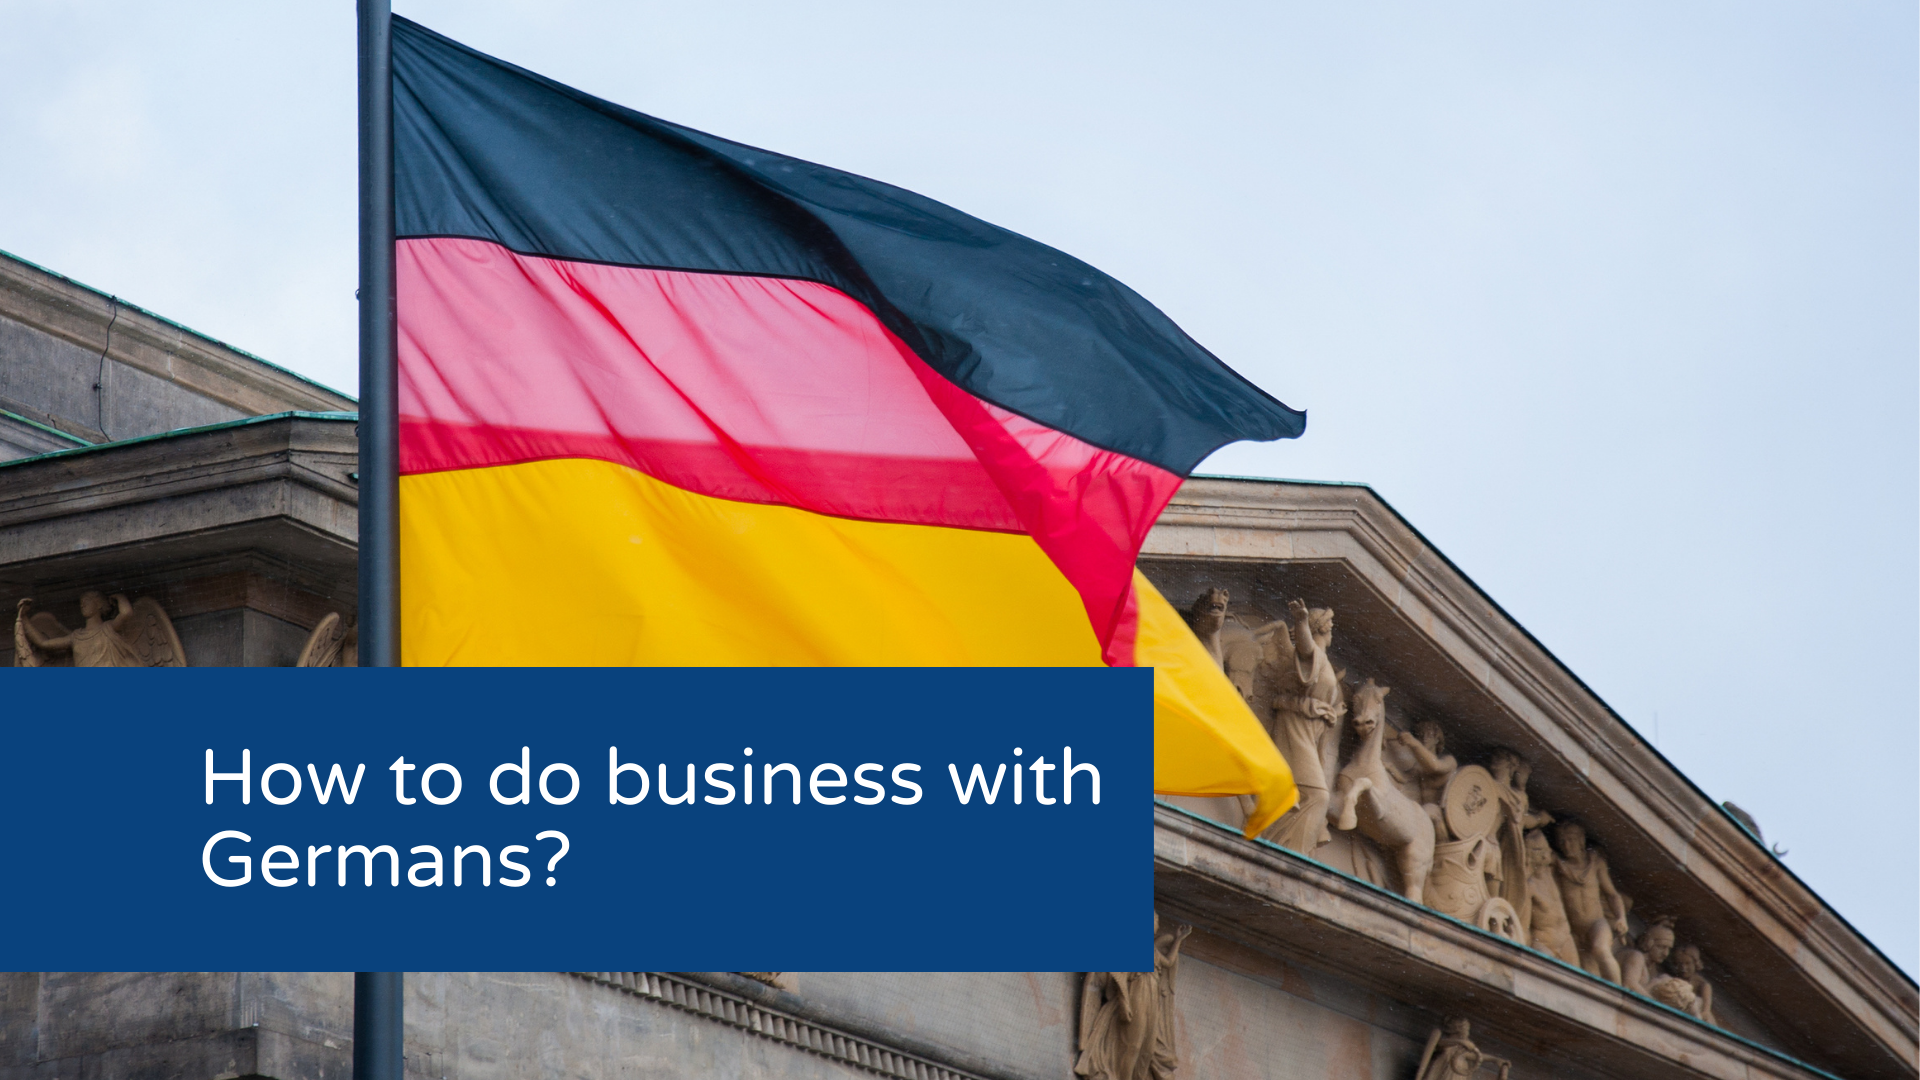 How to do business with Germans?